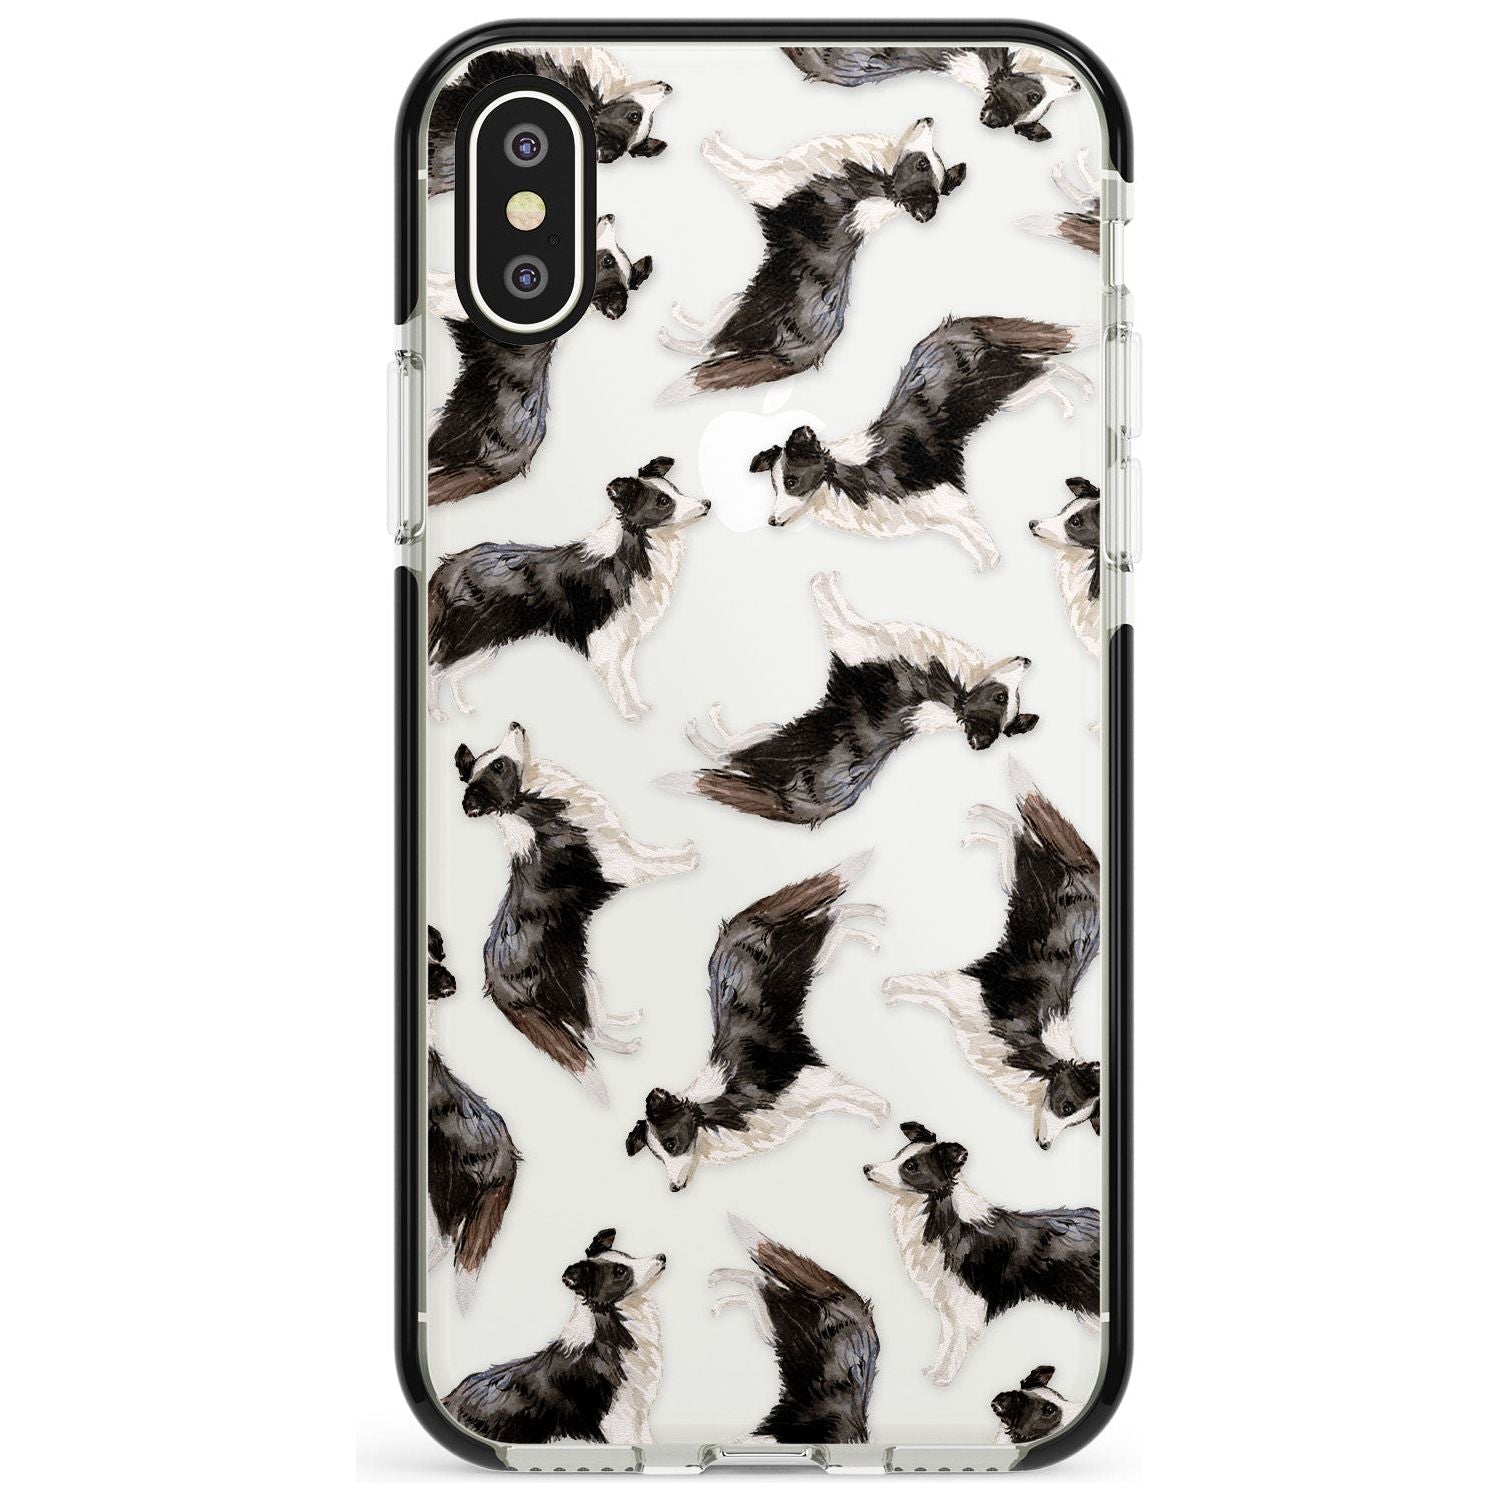 Border Collie Watercolour Dog Pattern Black Impact Phone Case for iPhone X XS Max XR